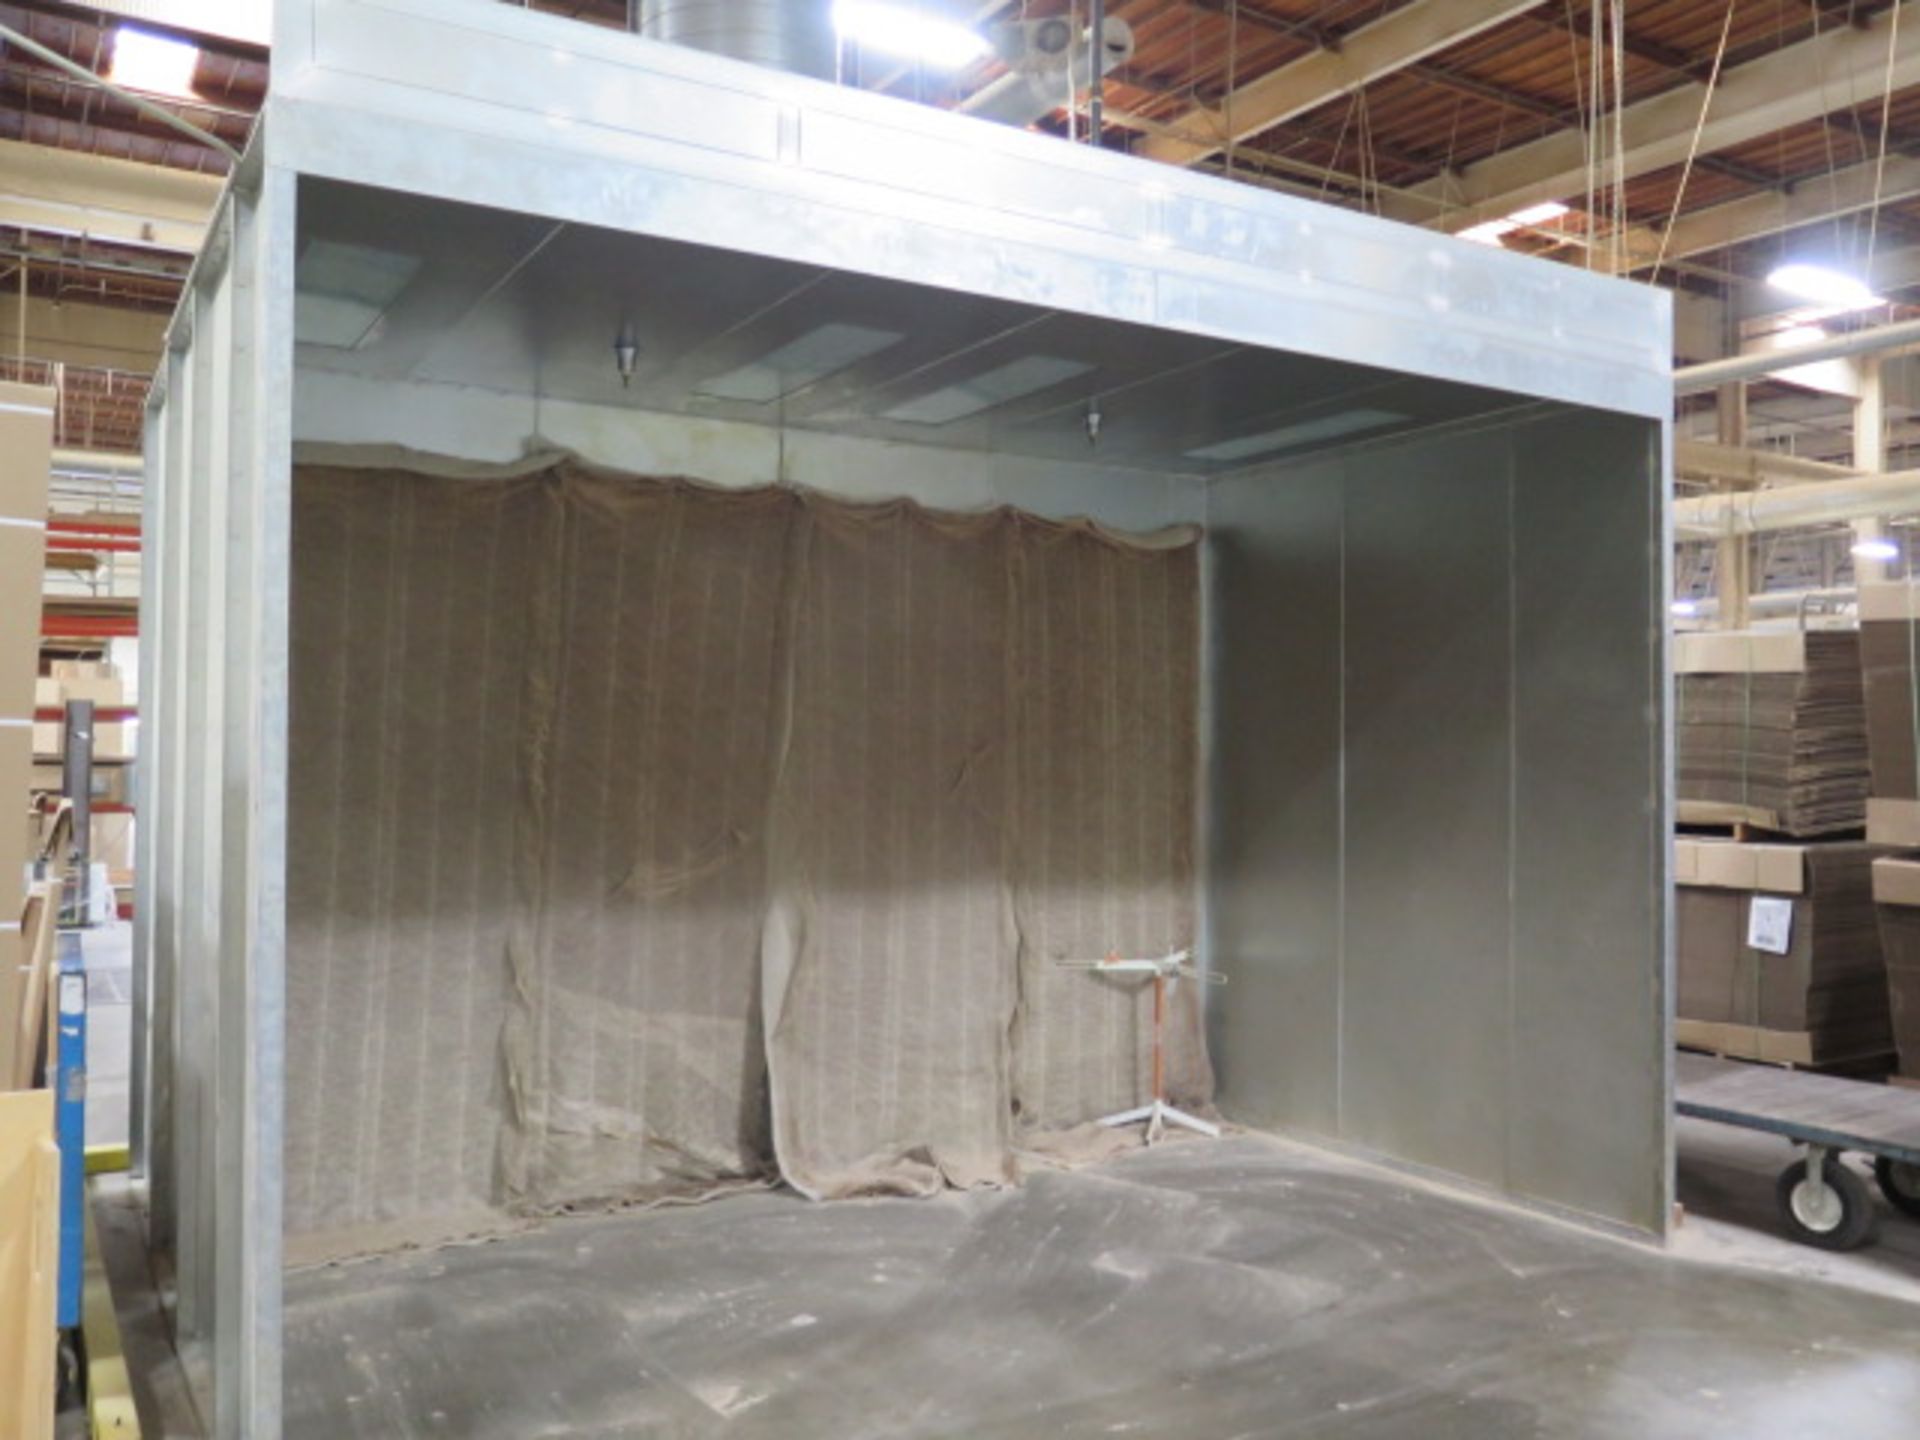 Paint Booth (NEW) 14’8” W x 9’6” H x 8’6” D w/ Blower and Lights (SOLD AS-IS - NO WARRANTY) - Image 3 of 10